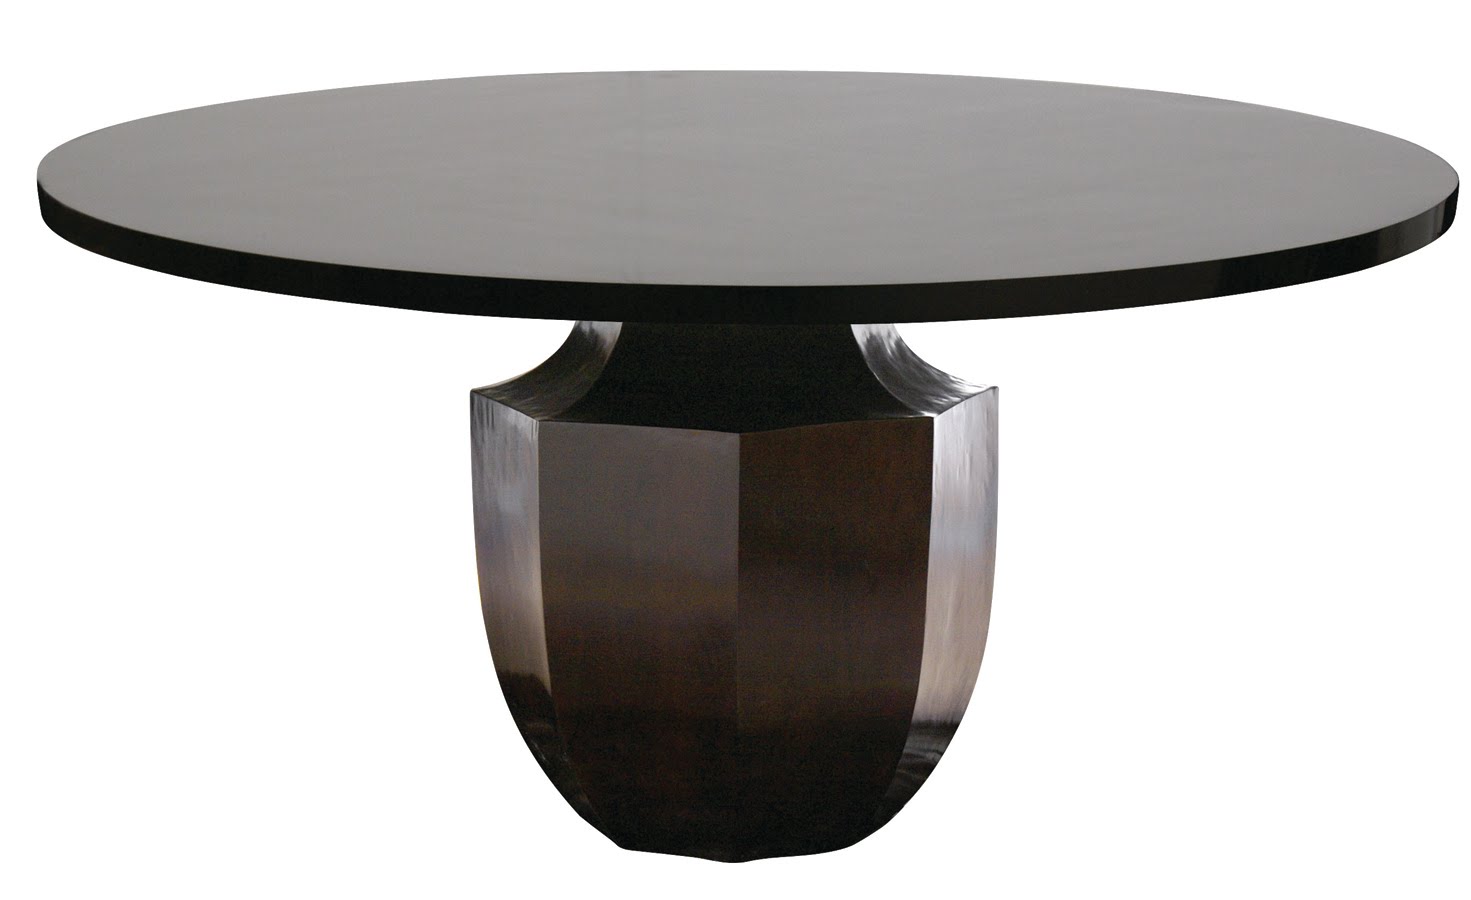 Prairie Perch: My Top 5 Round Dining Tables